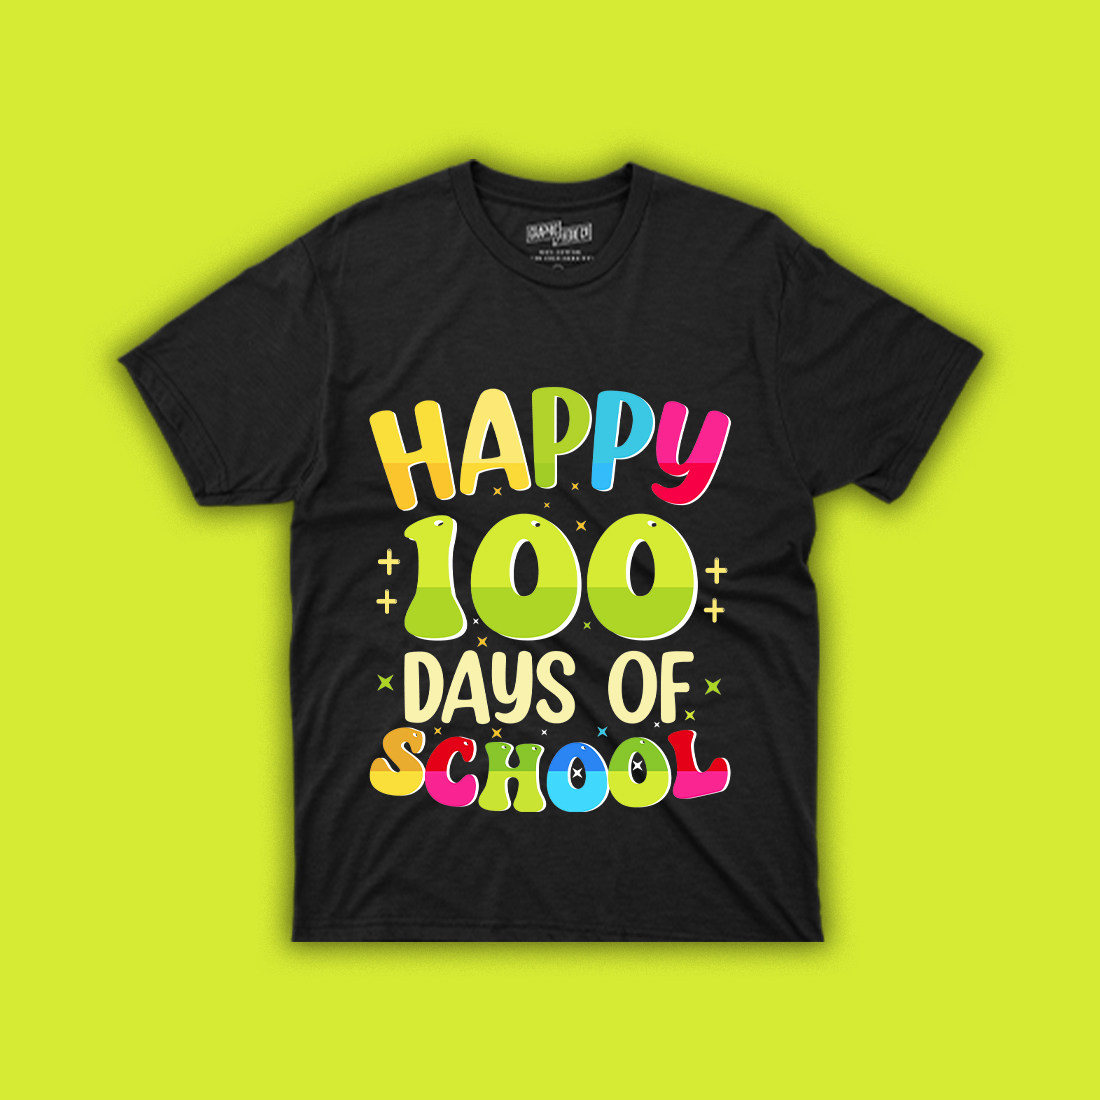 100 Days of School Quote T-shirt Design Vector with mockup example.